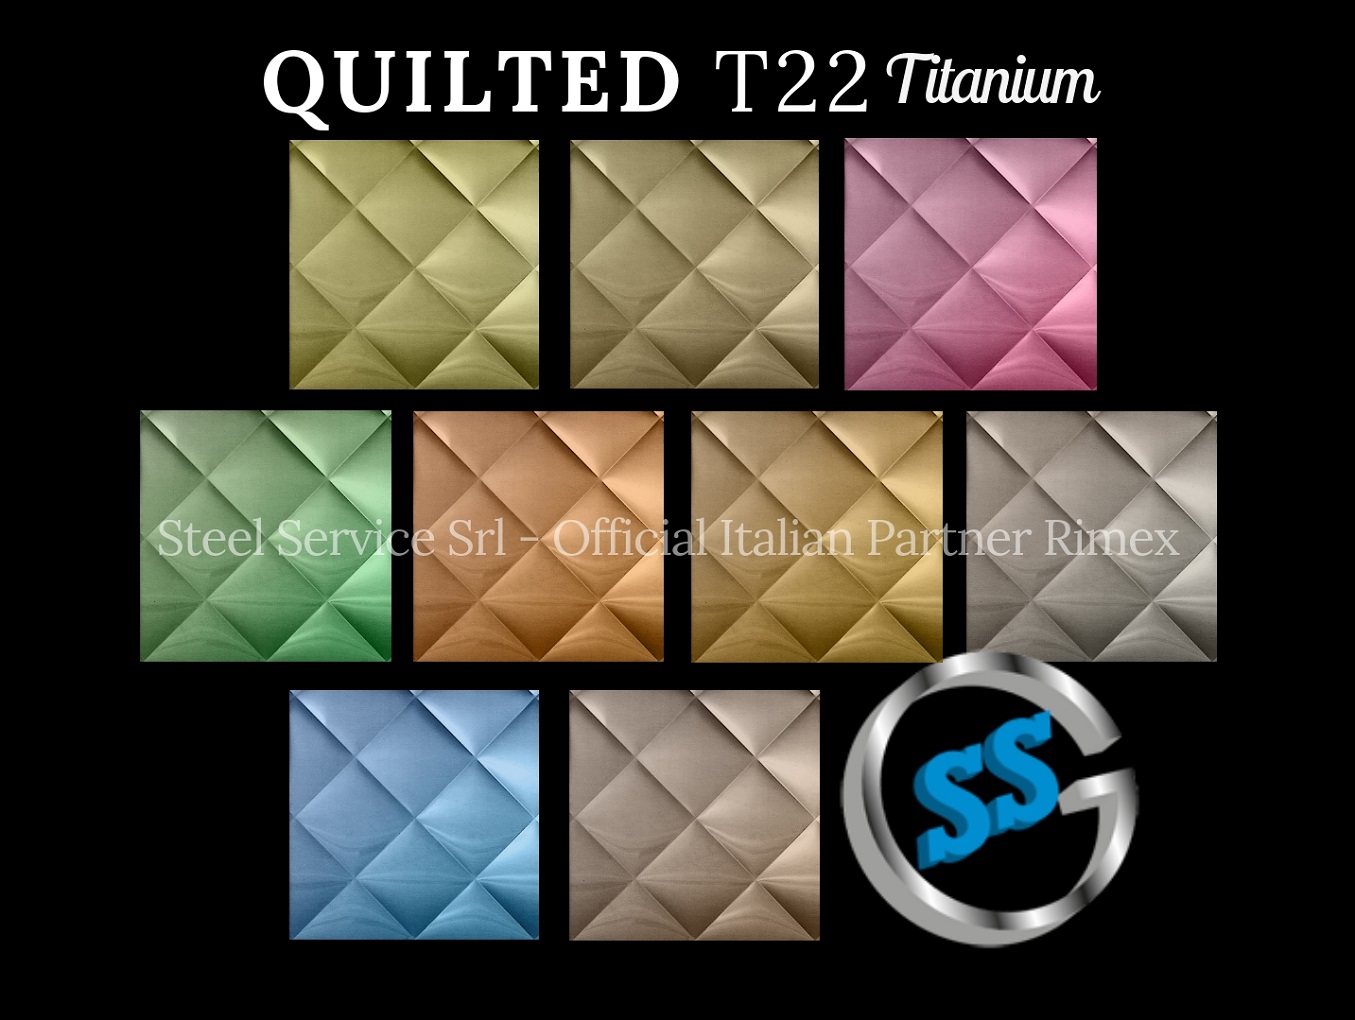 Quilted gallery 3